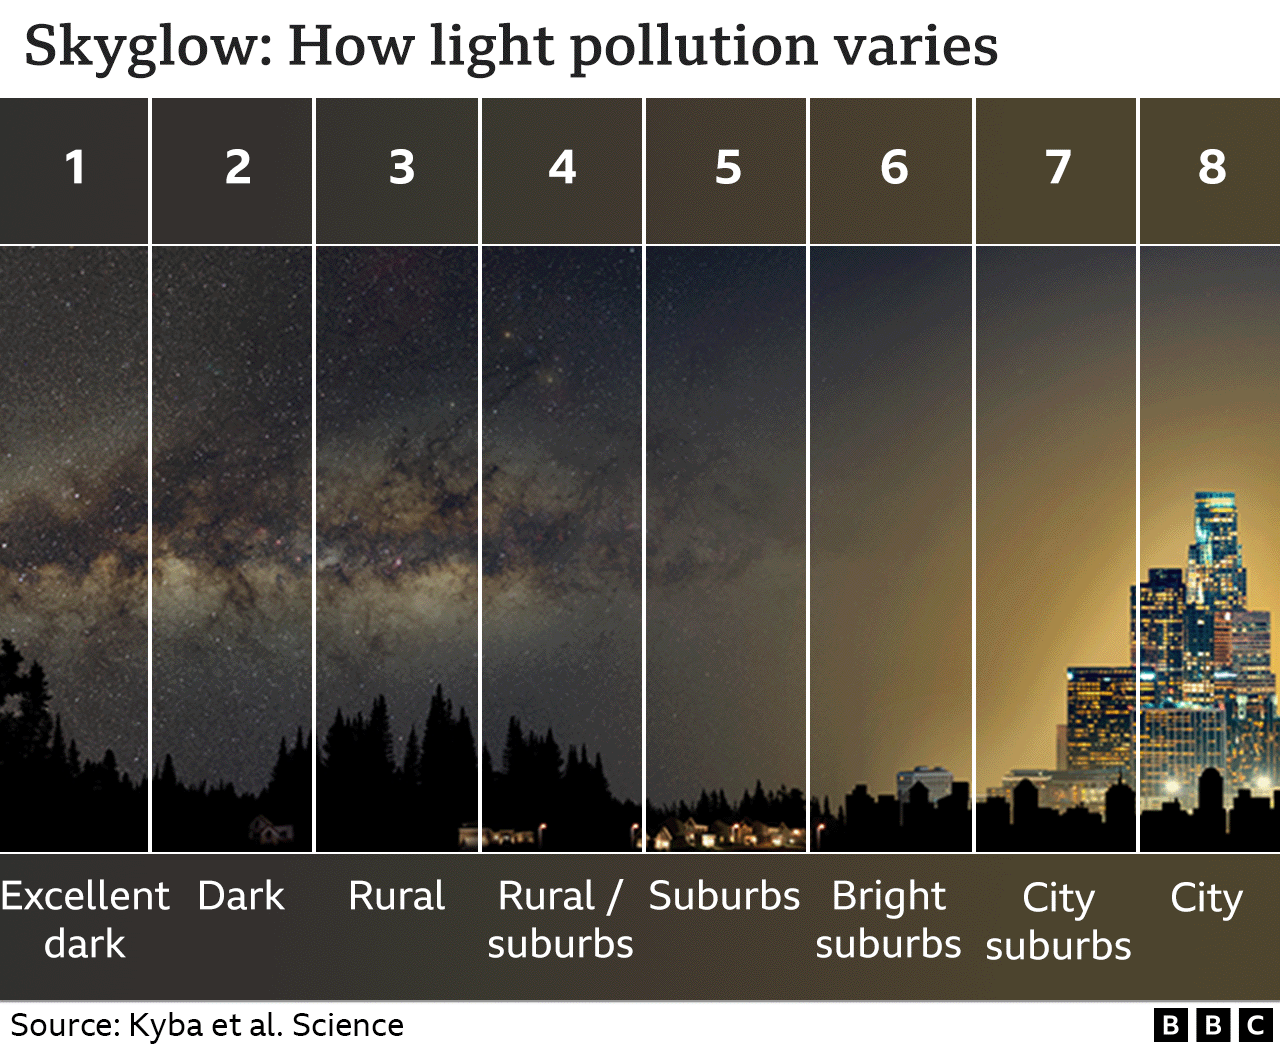 Graphic showing eight levels of light pollution from "excellent dark" to "city"